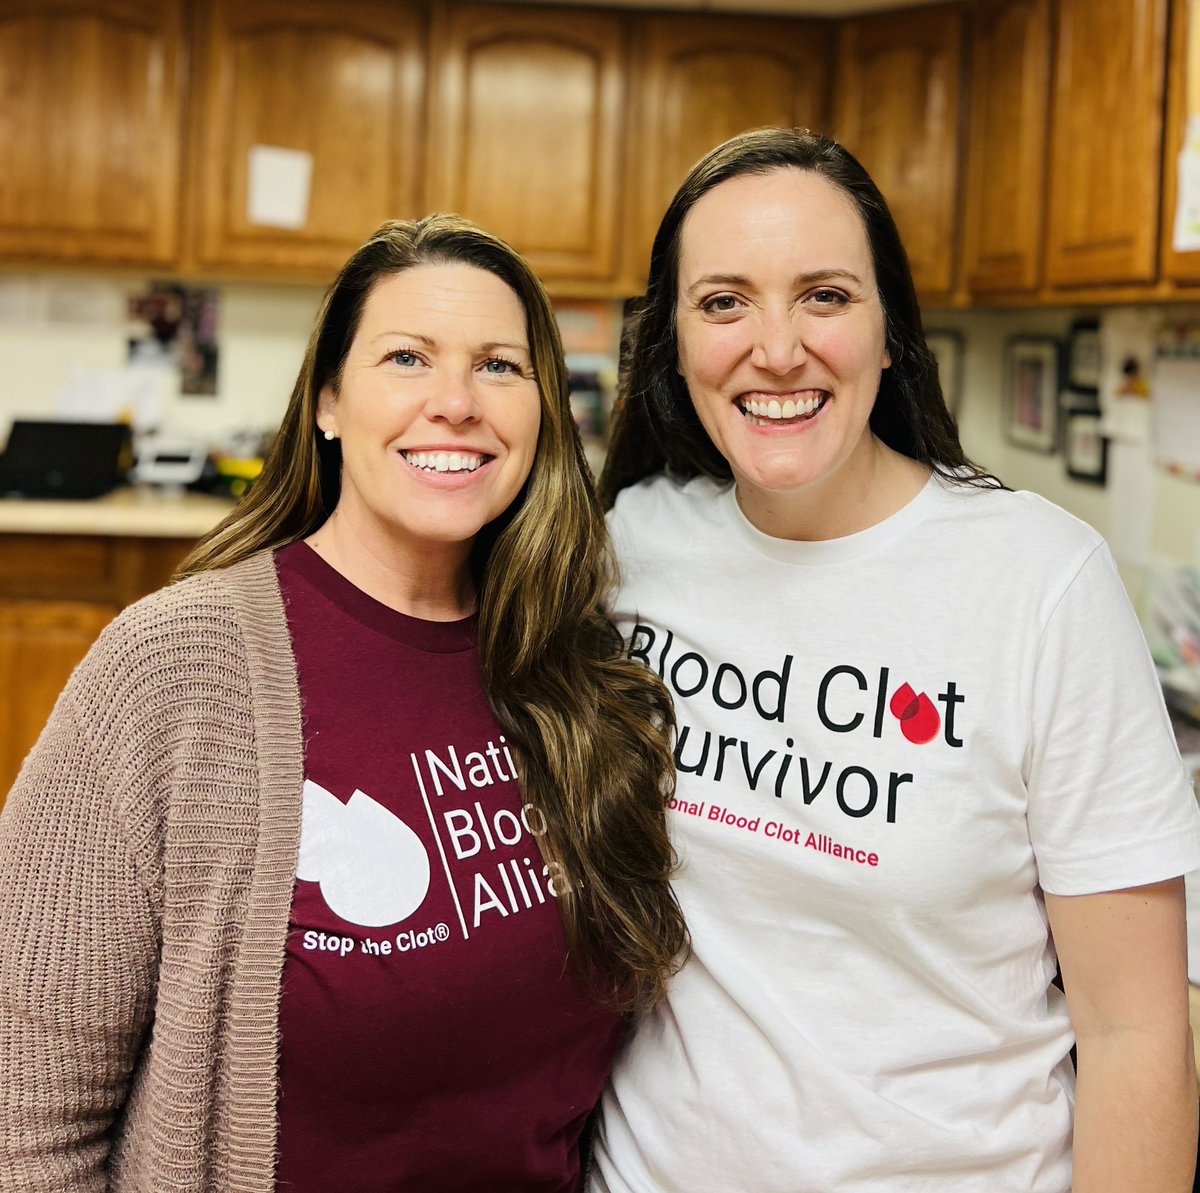 Celebrating my birthday and my 1 year “clotiversary” this week. Am so thankful for my amazing work family who helped me celebrate today with matching shirts, and for helping me navigate the last year of blood thinner life @StopTheClot #bloodclotawareness